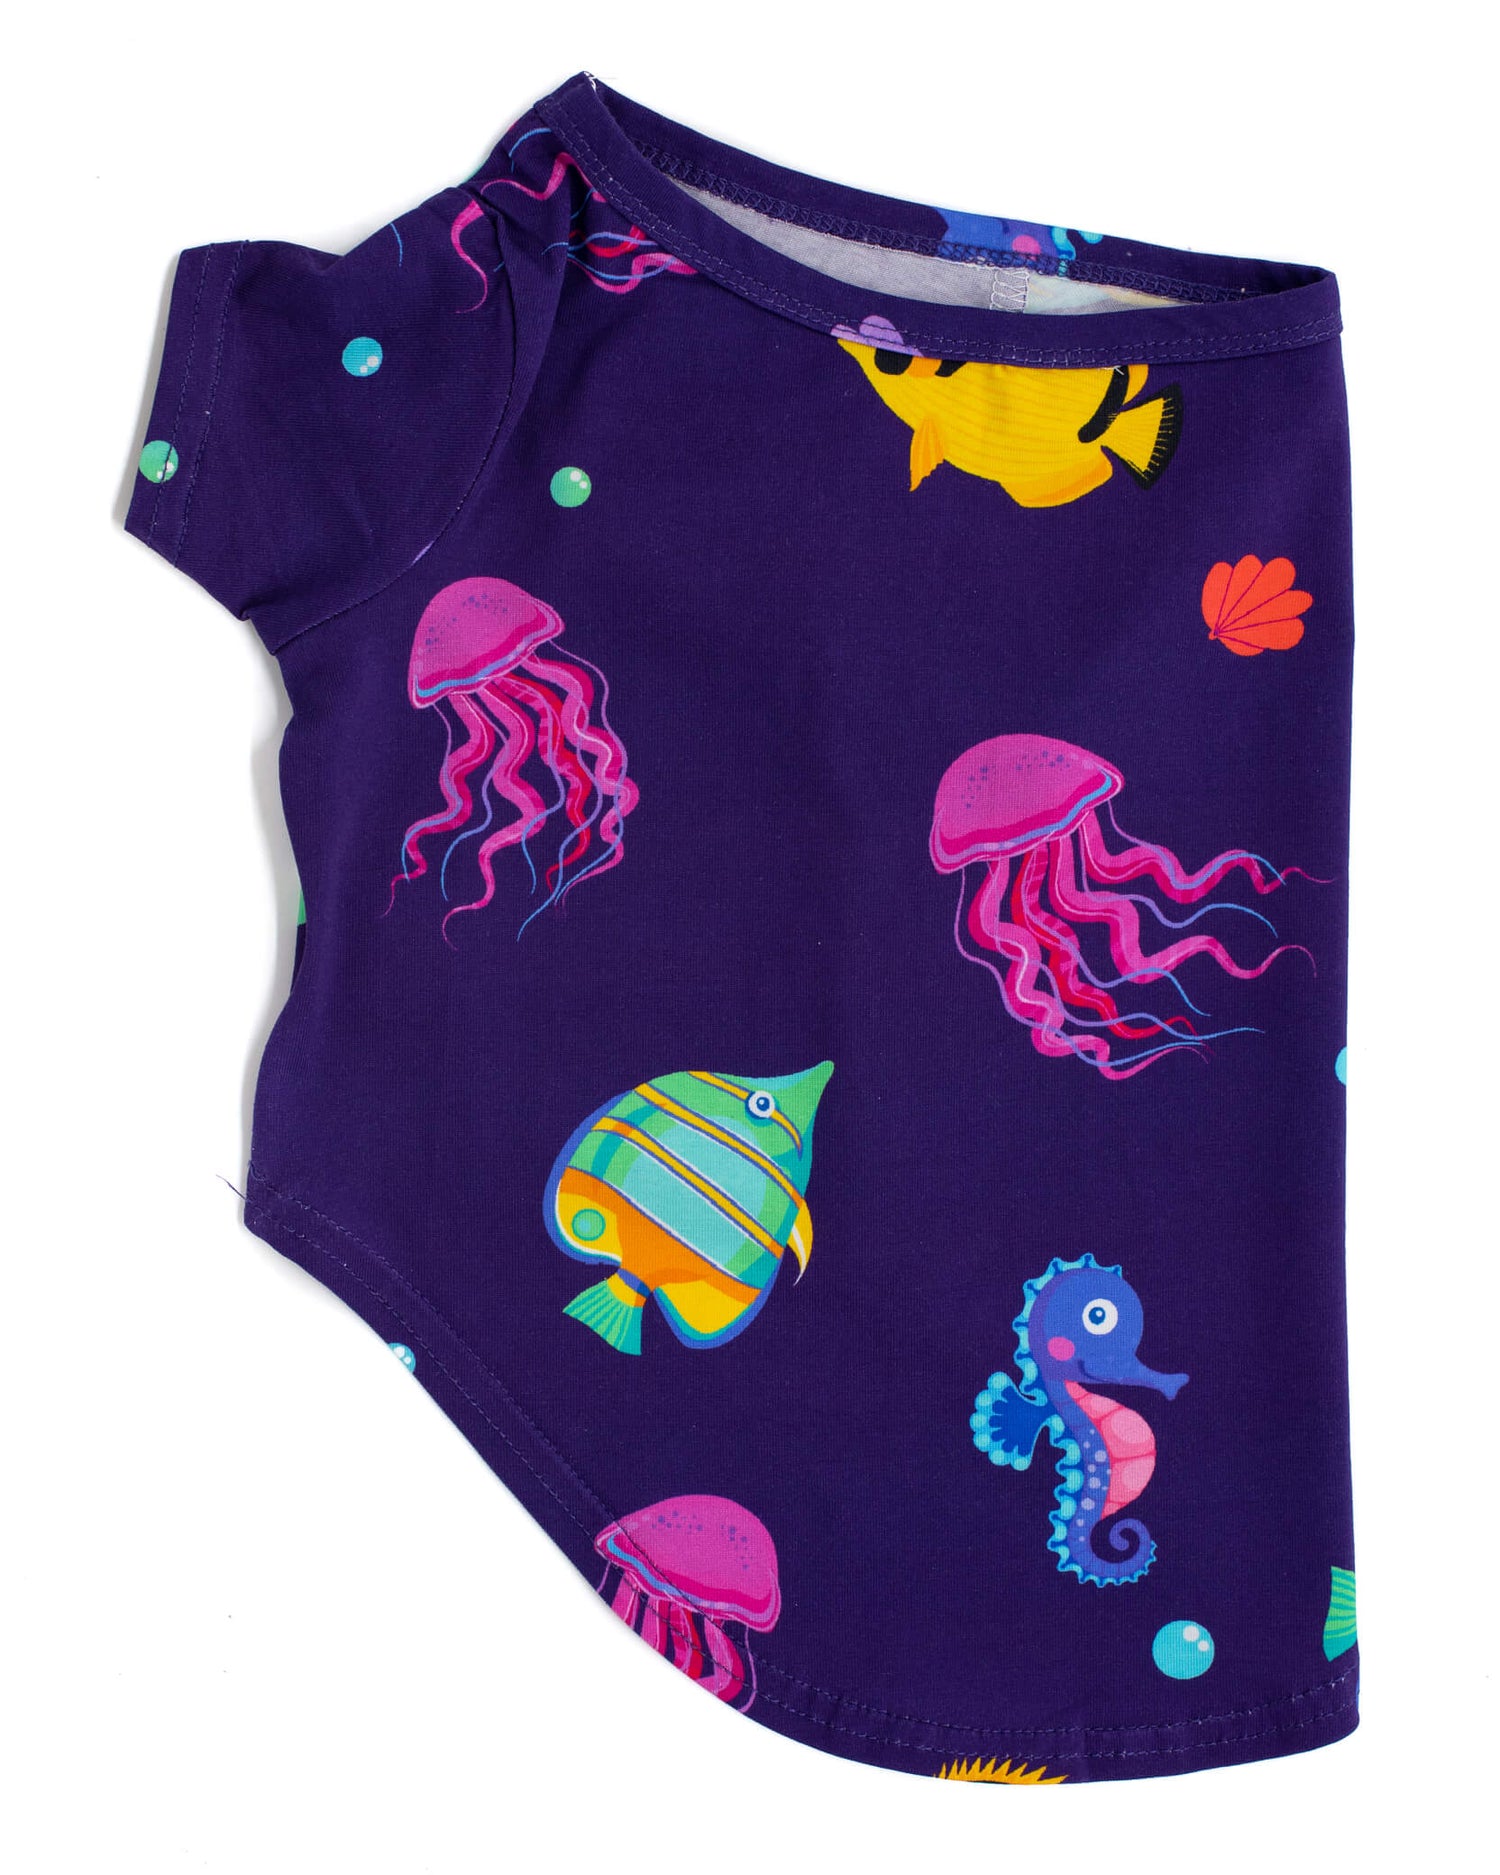 Side profile photo of a Vibrant Hound Magic sea dog shirt. The shirt is purple with yellow fish and pink octopus printed on it.